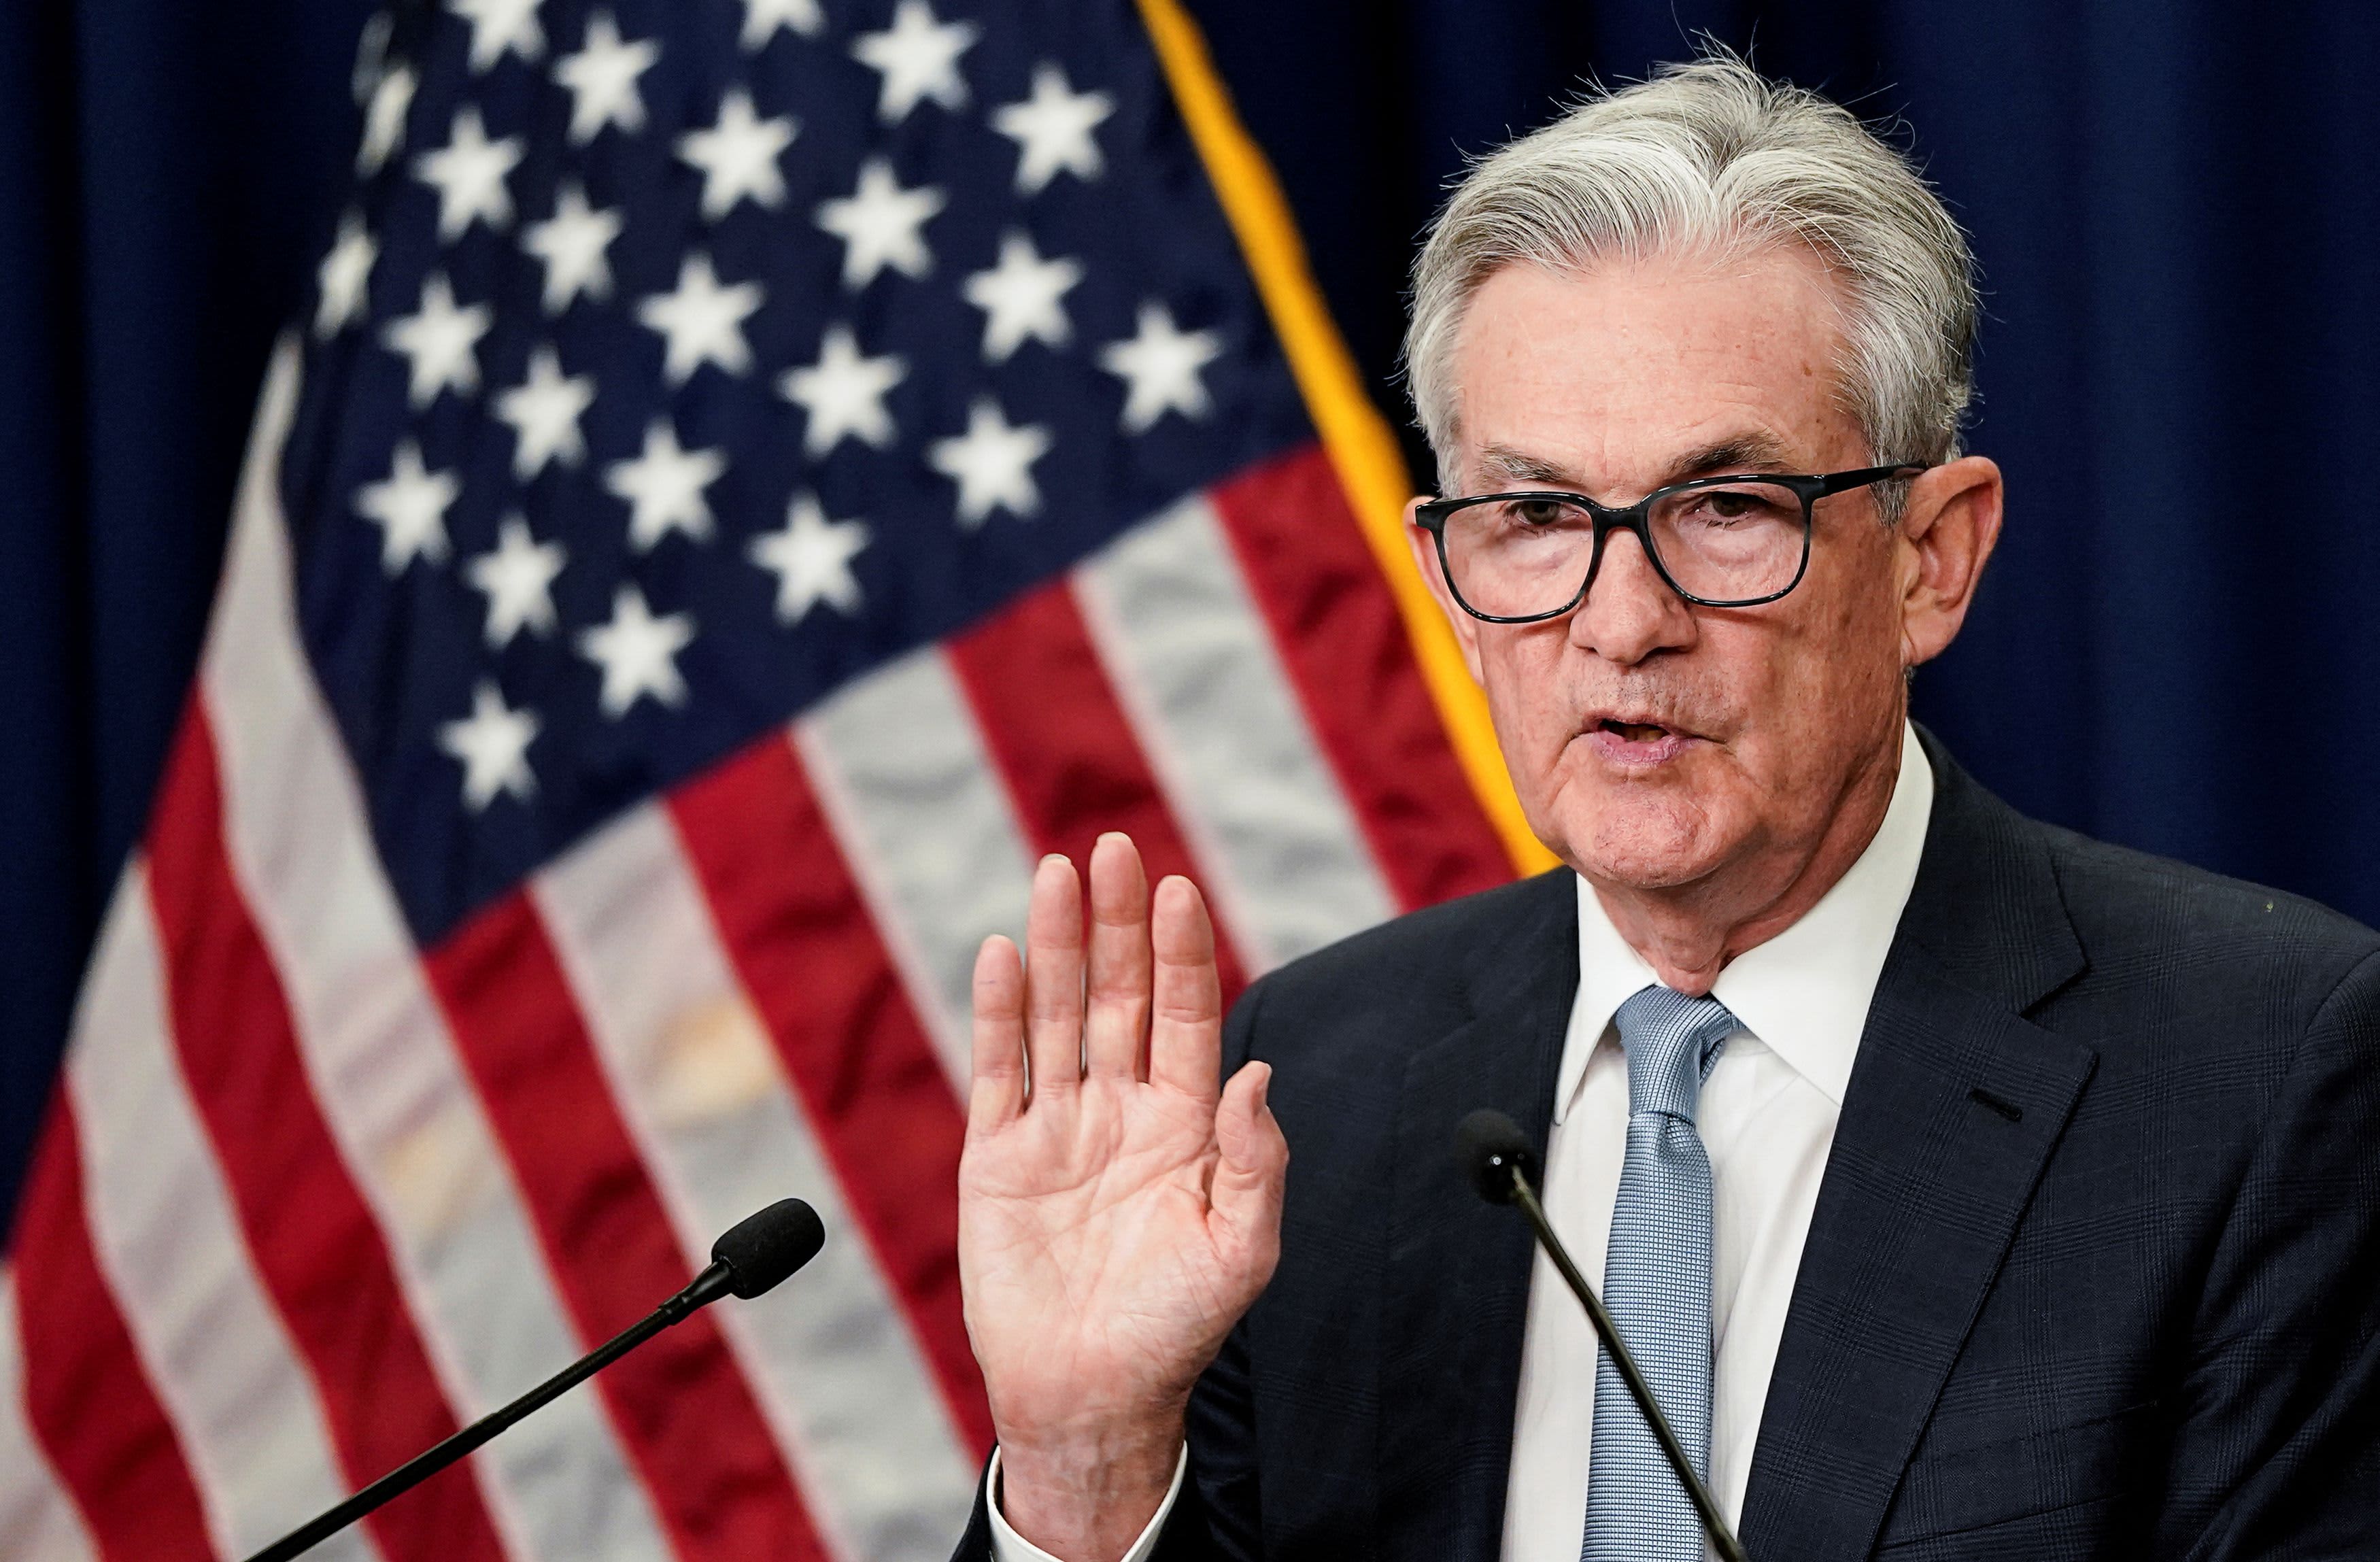 Fed decision July 2022: Fed hikes interest rates by 0.75 percentage point